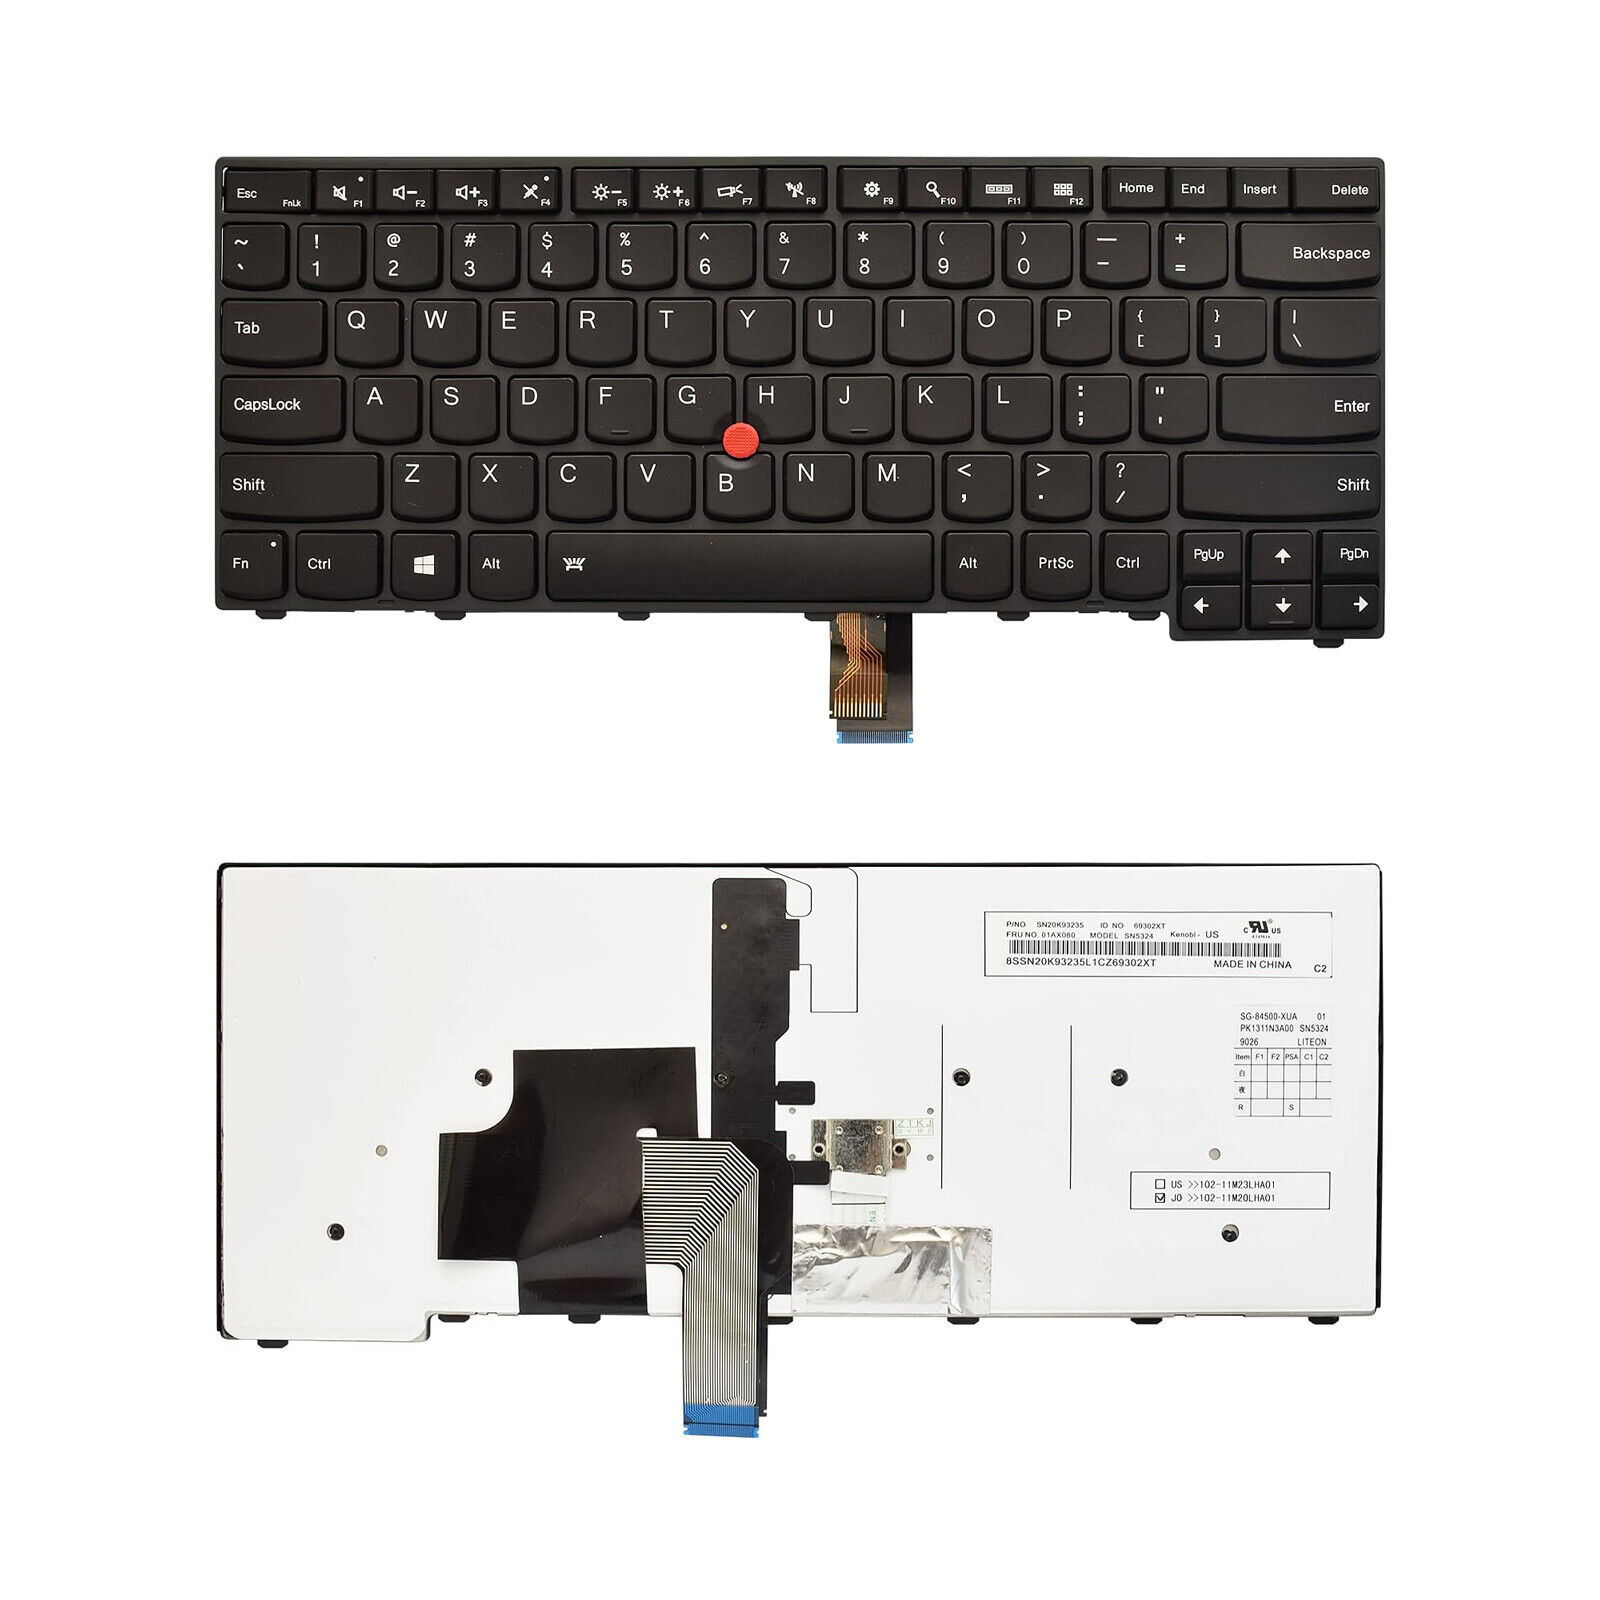 US Keyboard Backlit for Lenovo ThinkPad T440 T440E T440P T440S T450 T450S T460. Available Now for $32.99